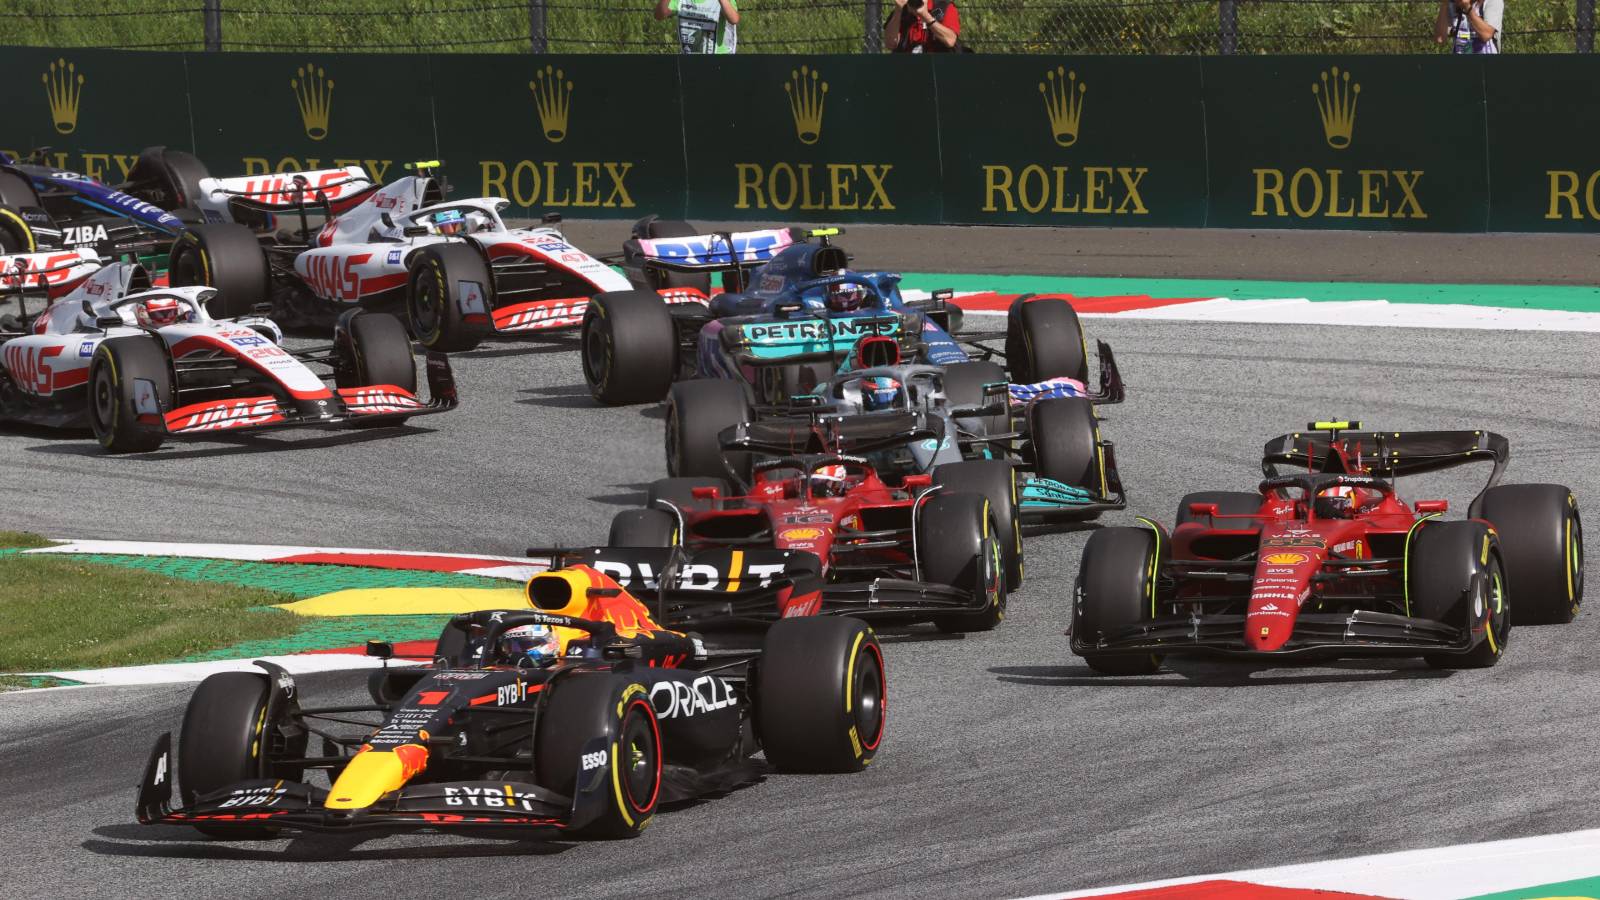 Max Verstappen leads at the start of the Austrian GP sprint. Red Bull Ring July 2022.